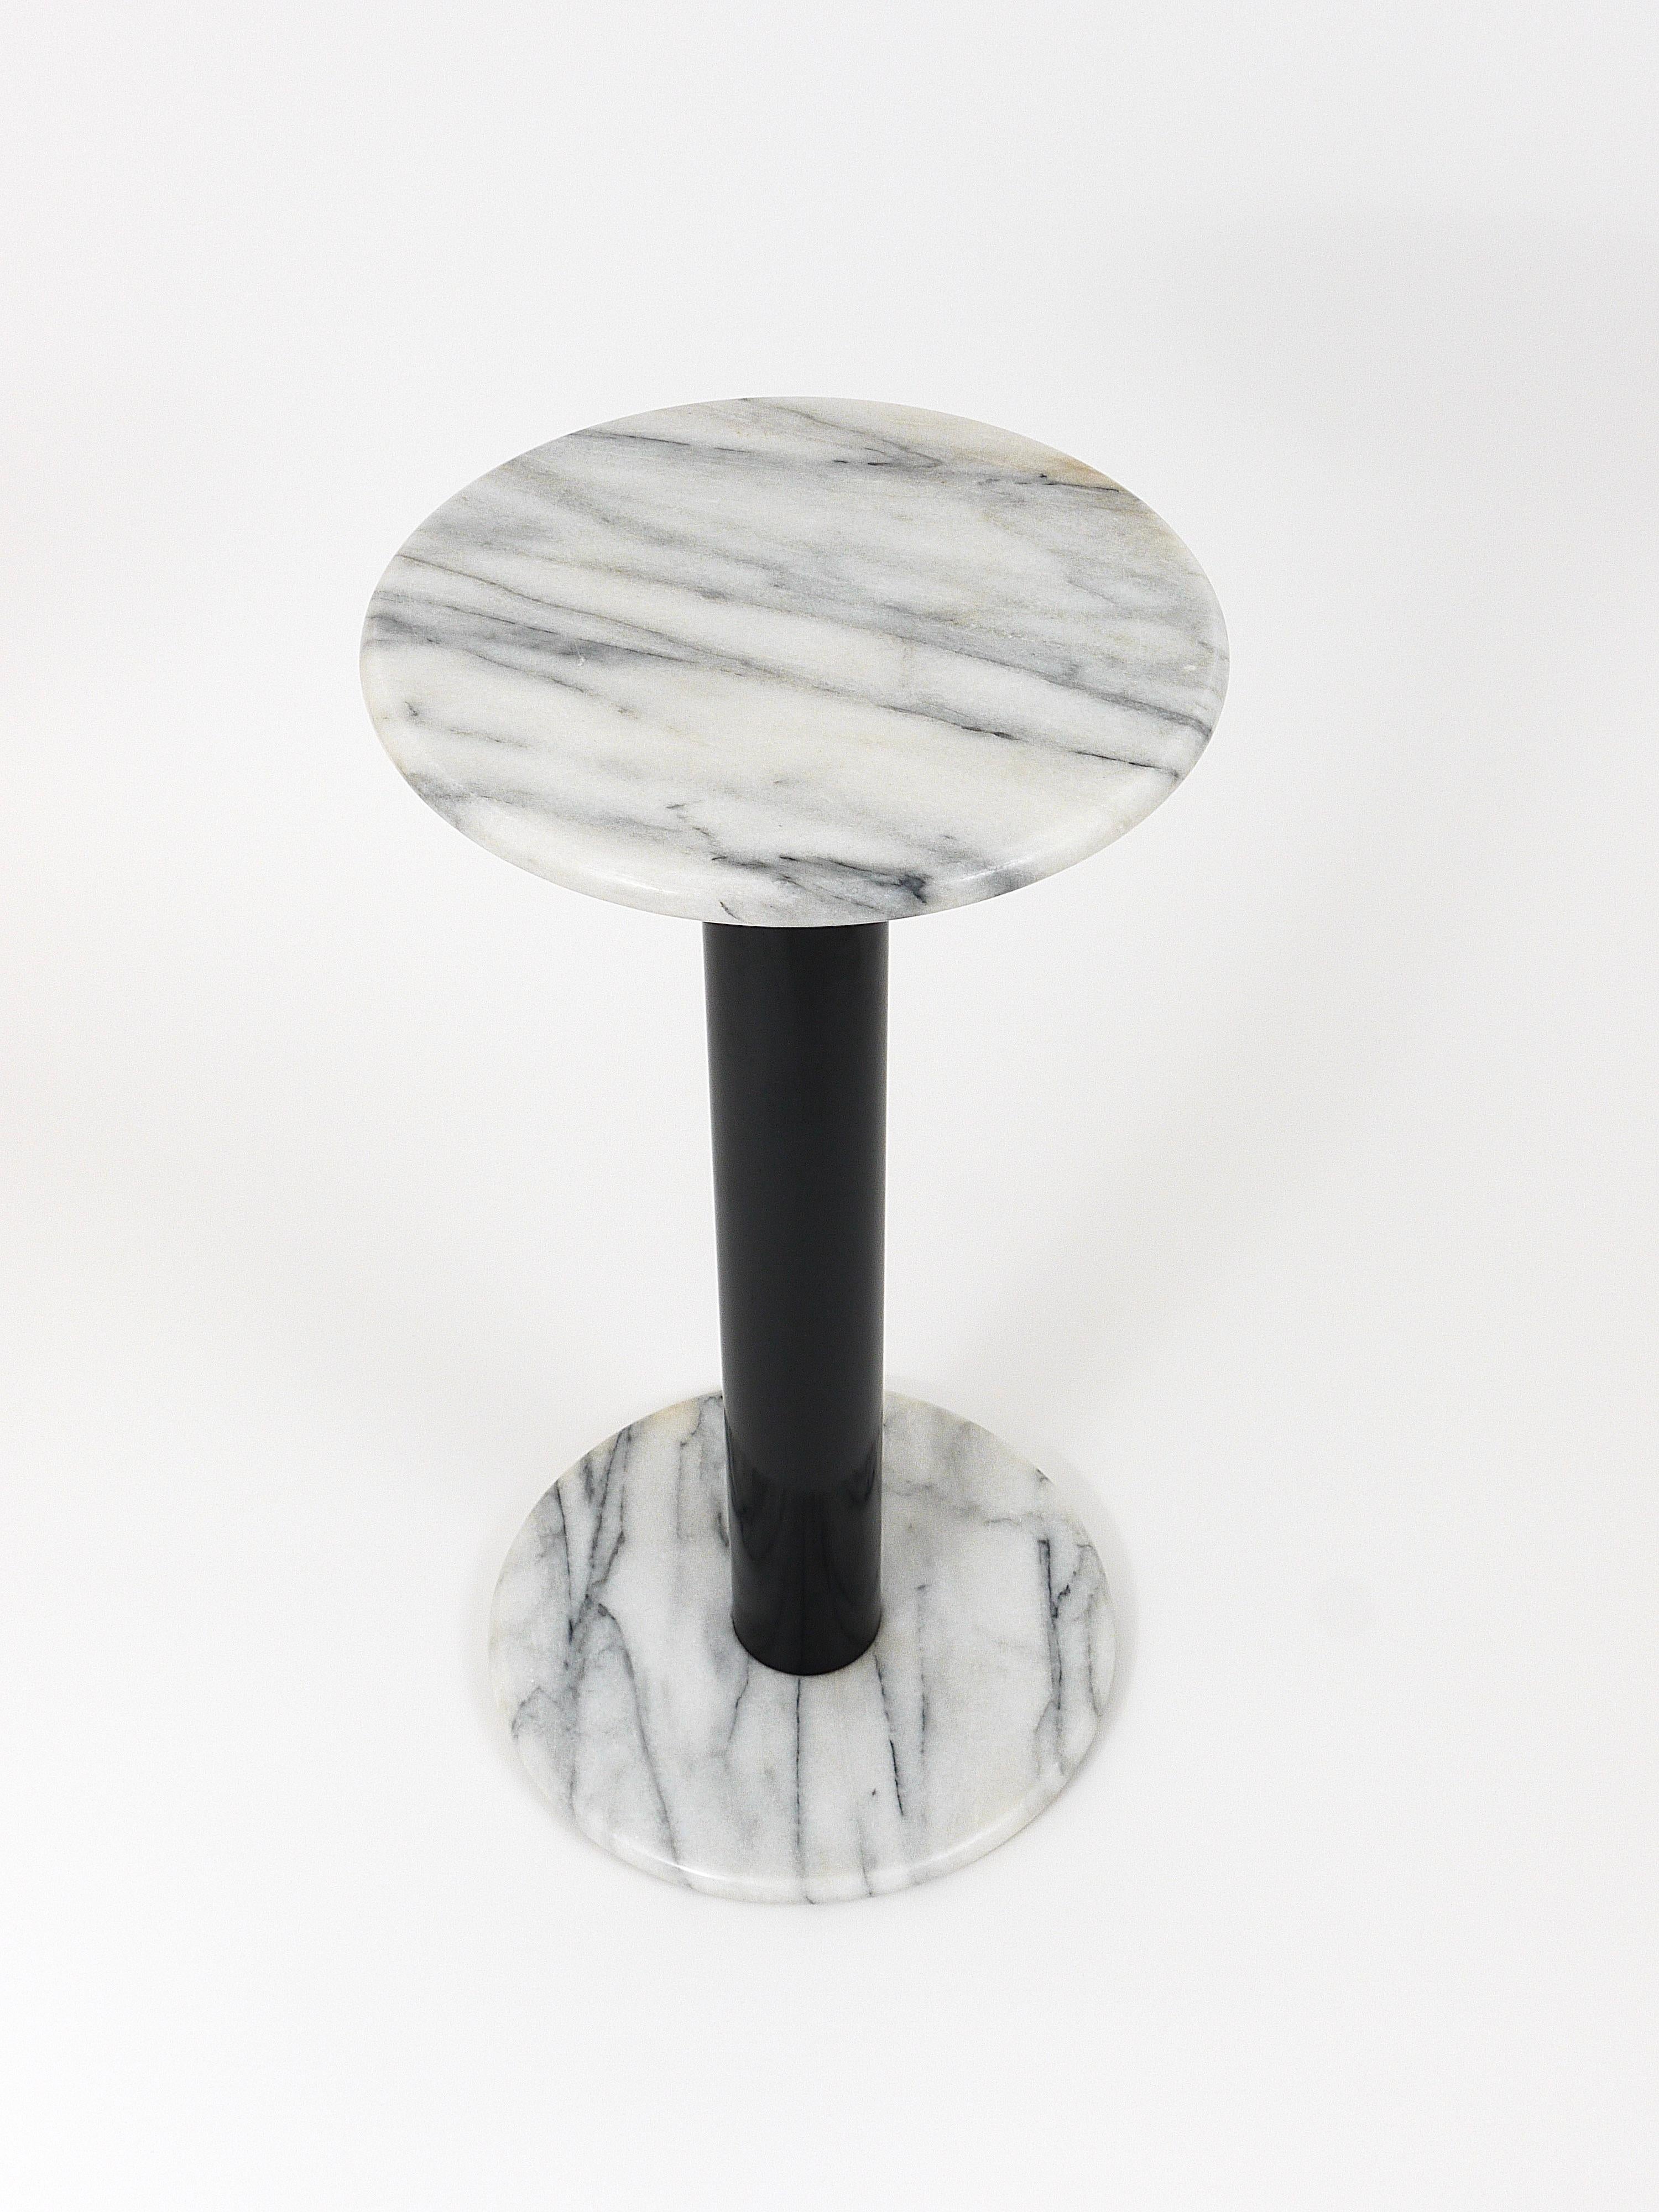 A beautiful Italian post-modern pedestal / flower table / plant stand with a white marble base and top and a black metal stem. Made in Italy in the 1980s, in good condition, with marginal signs of age.